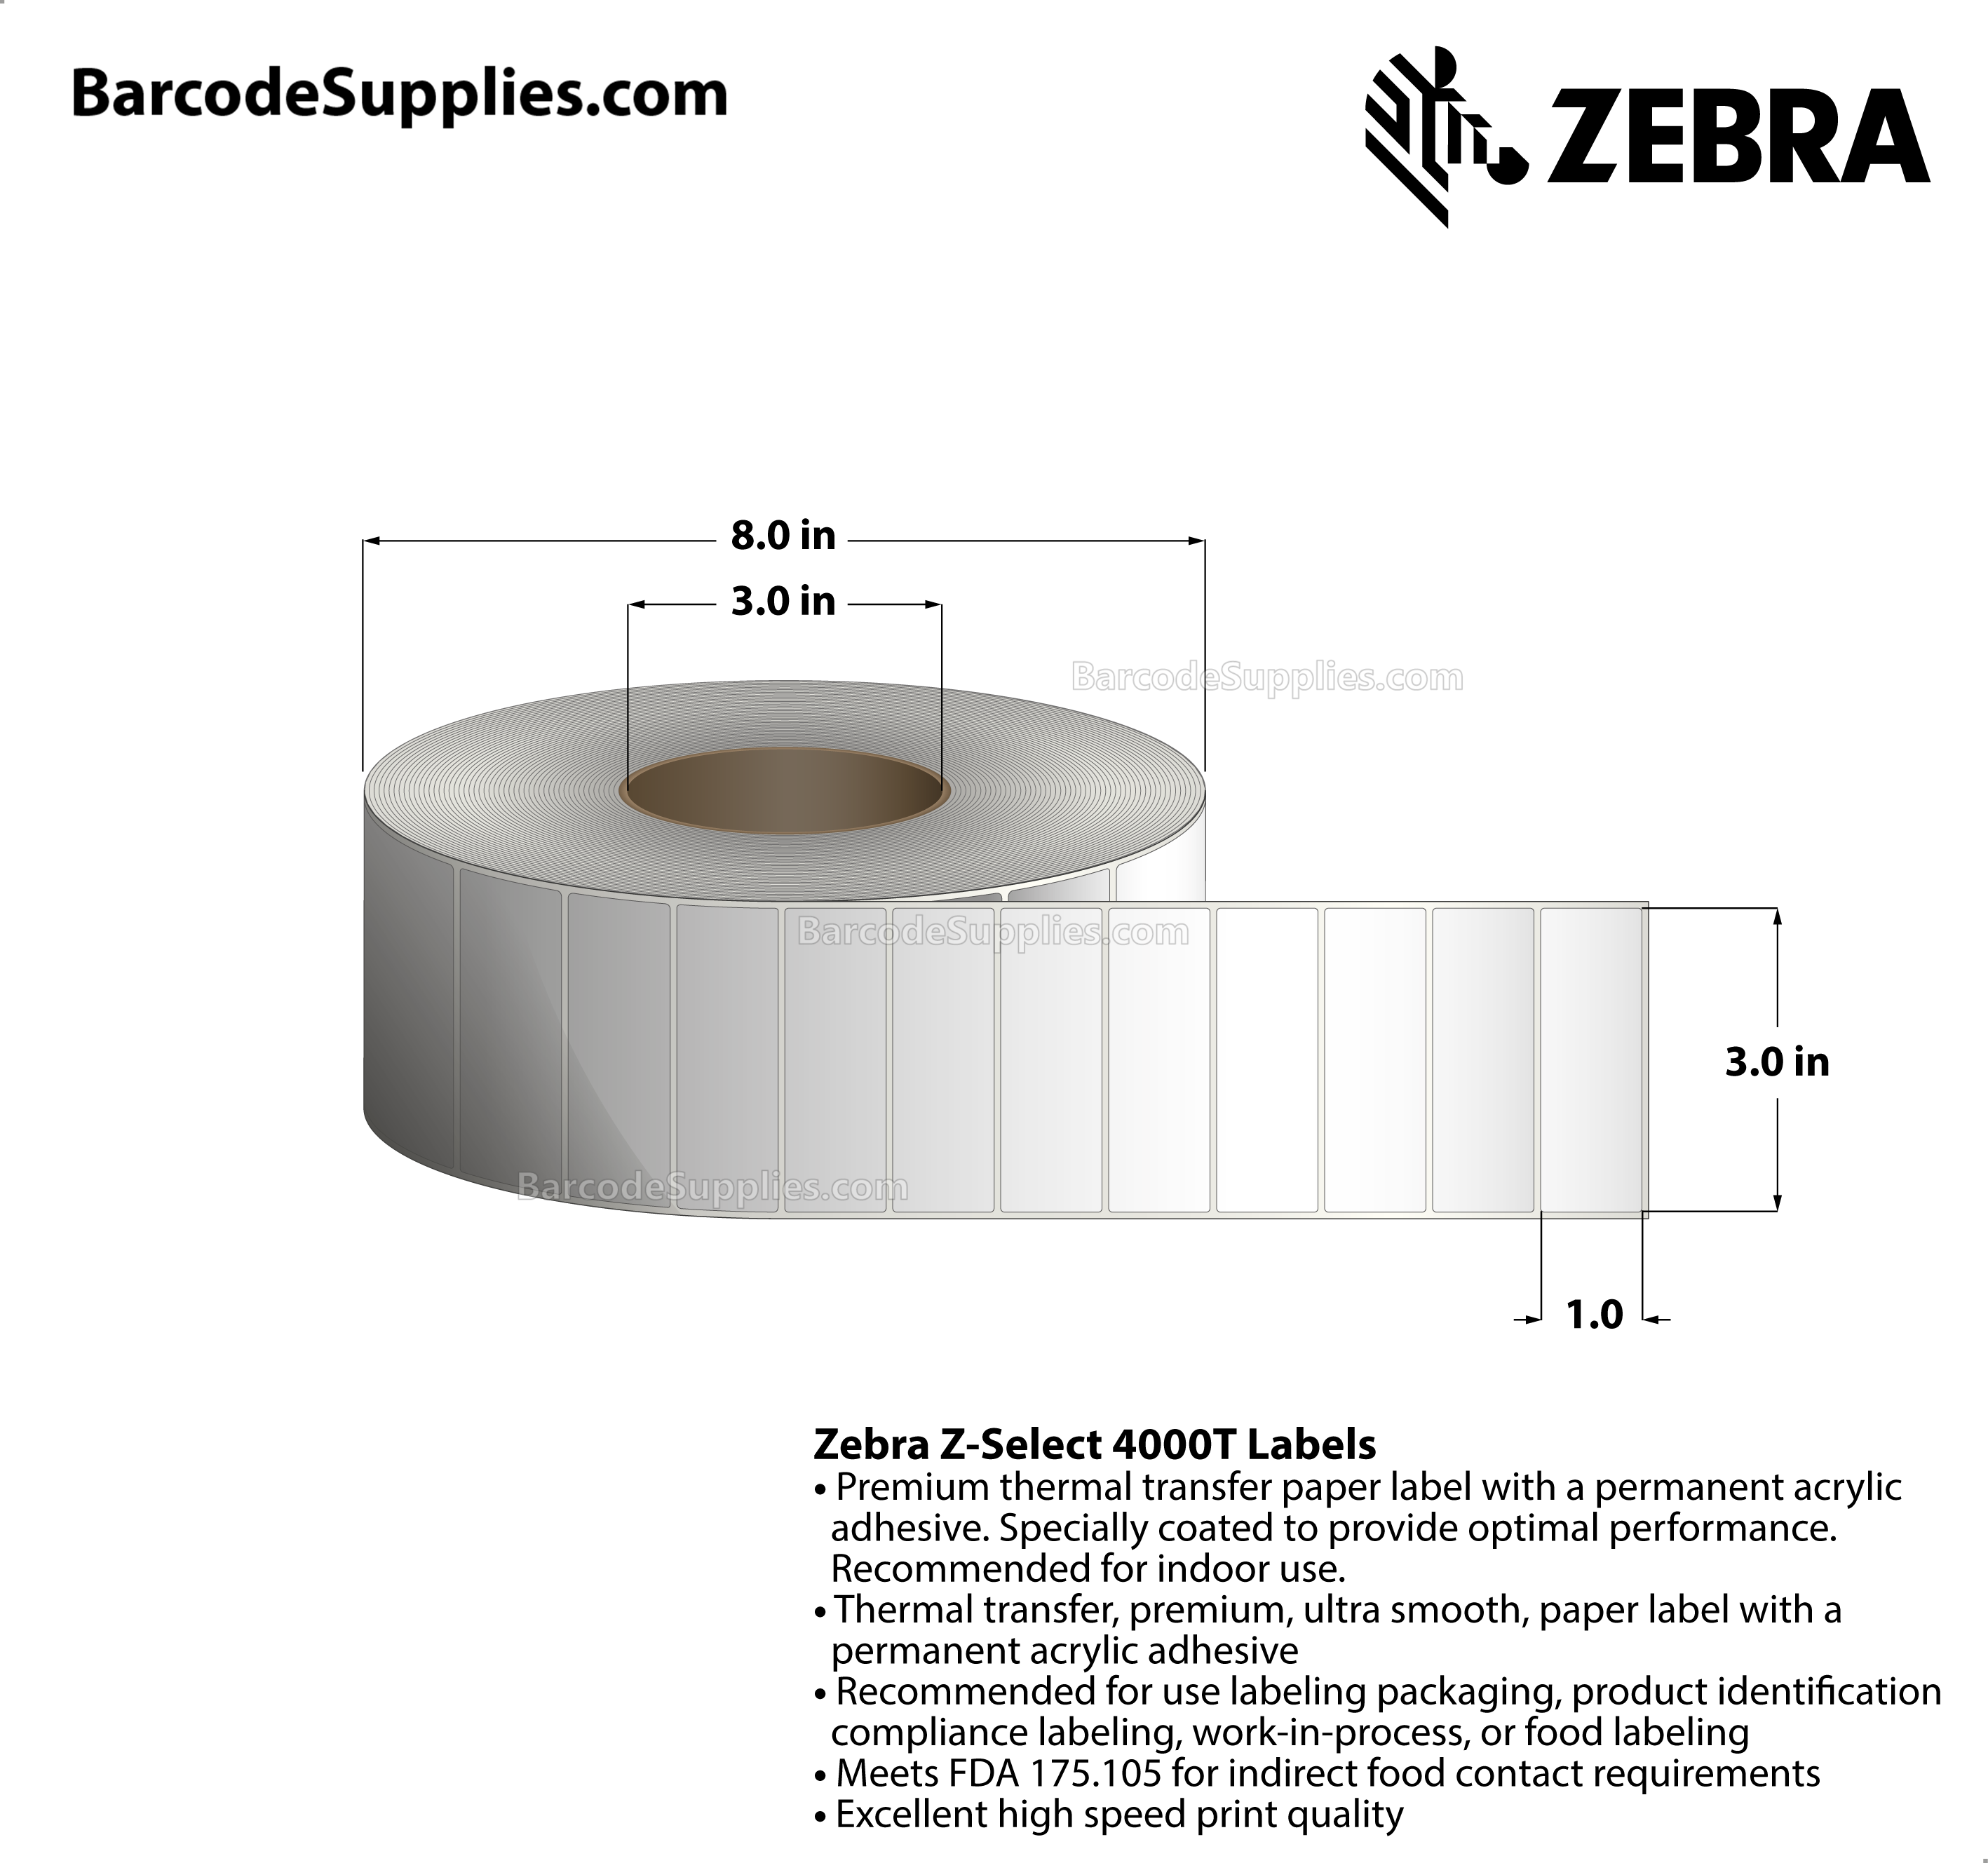 3 x 1 Thermal Transfer White Z-Select 4000T Labels With Permanent Adhesive - Not Perforated - 5180 Labels Per Roll - Carton Of 6 Rolls - 31080 Labels Total - MPN: 72284